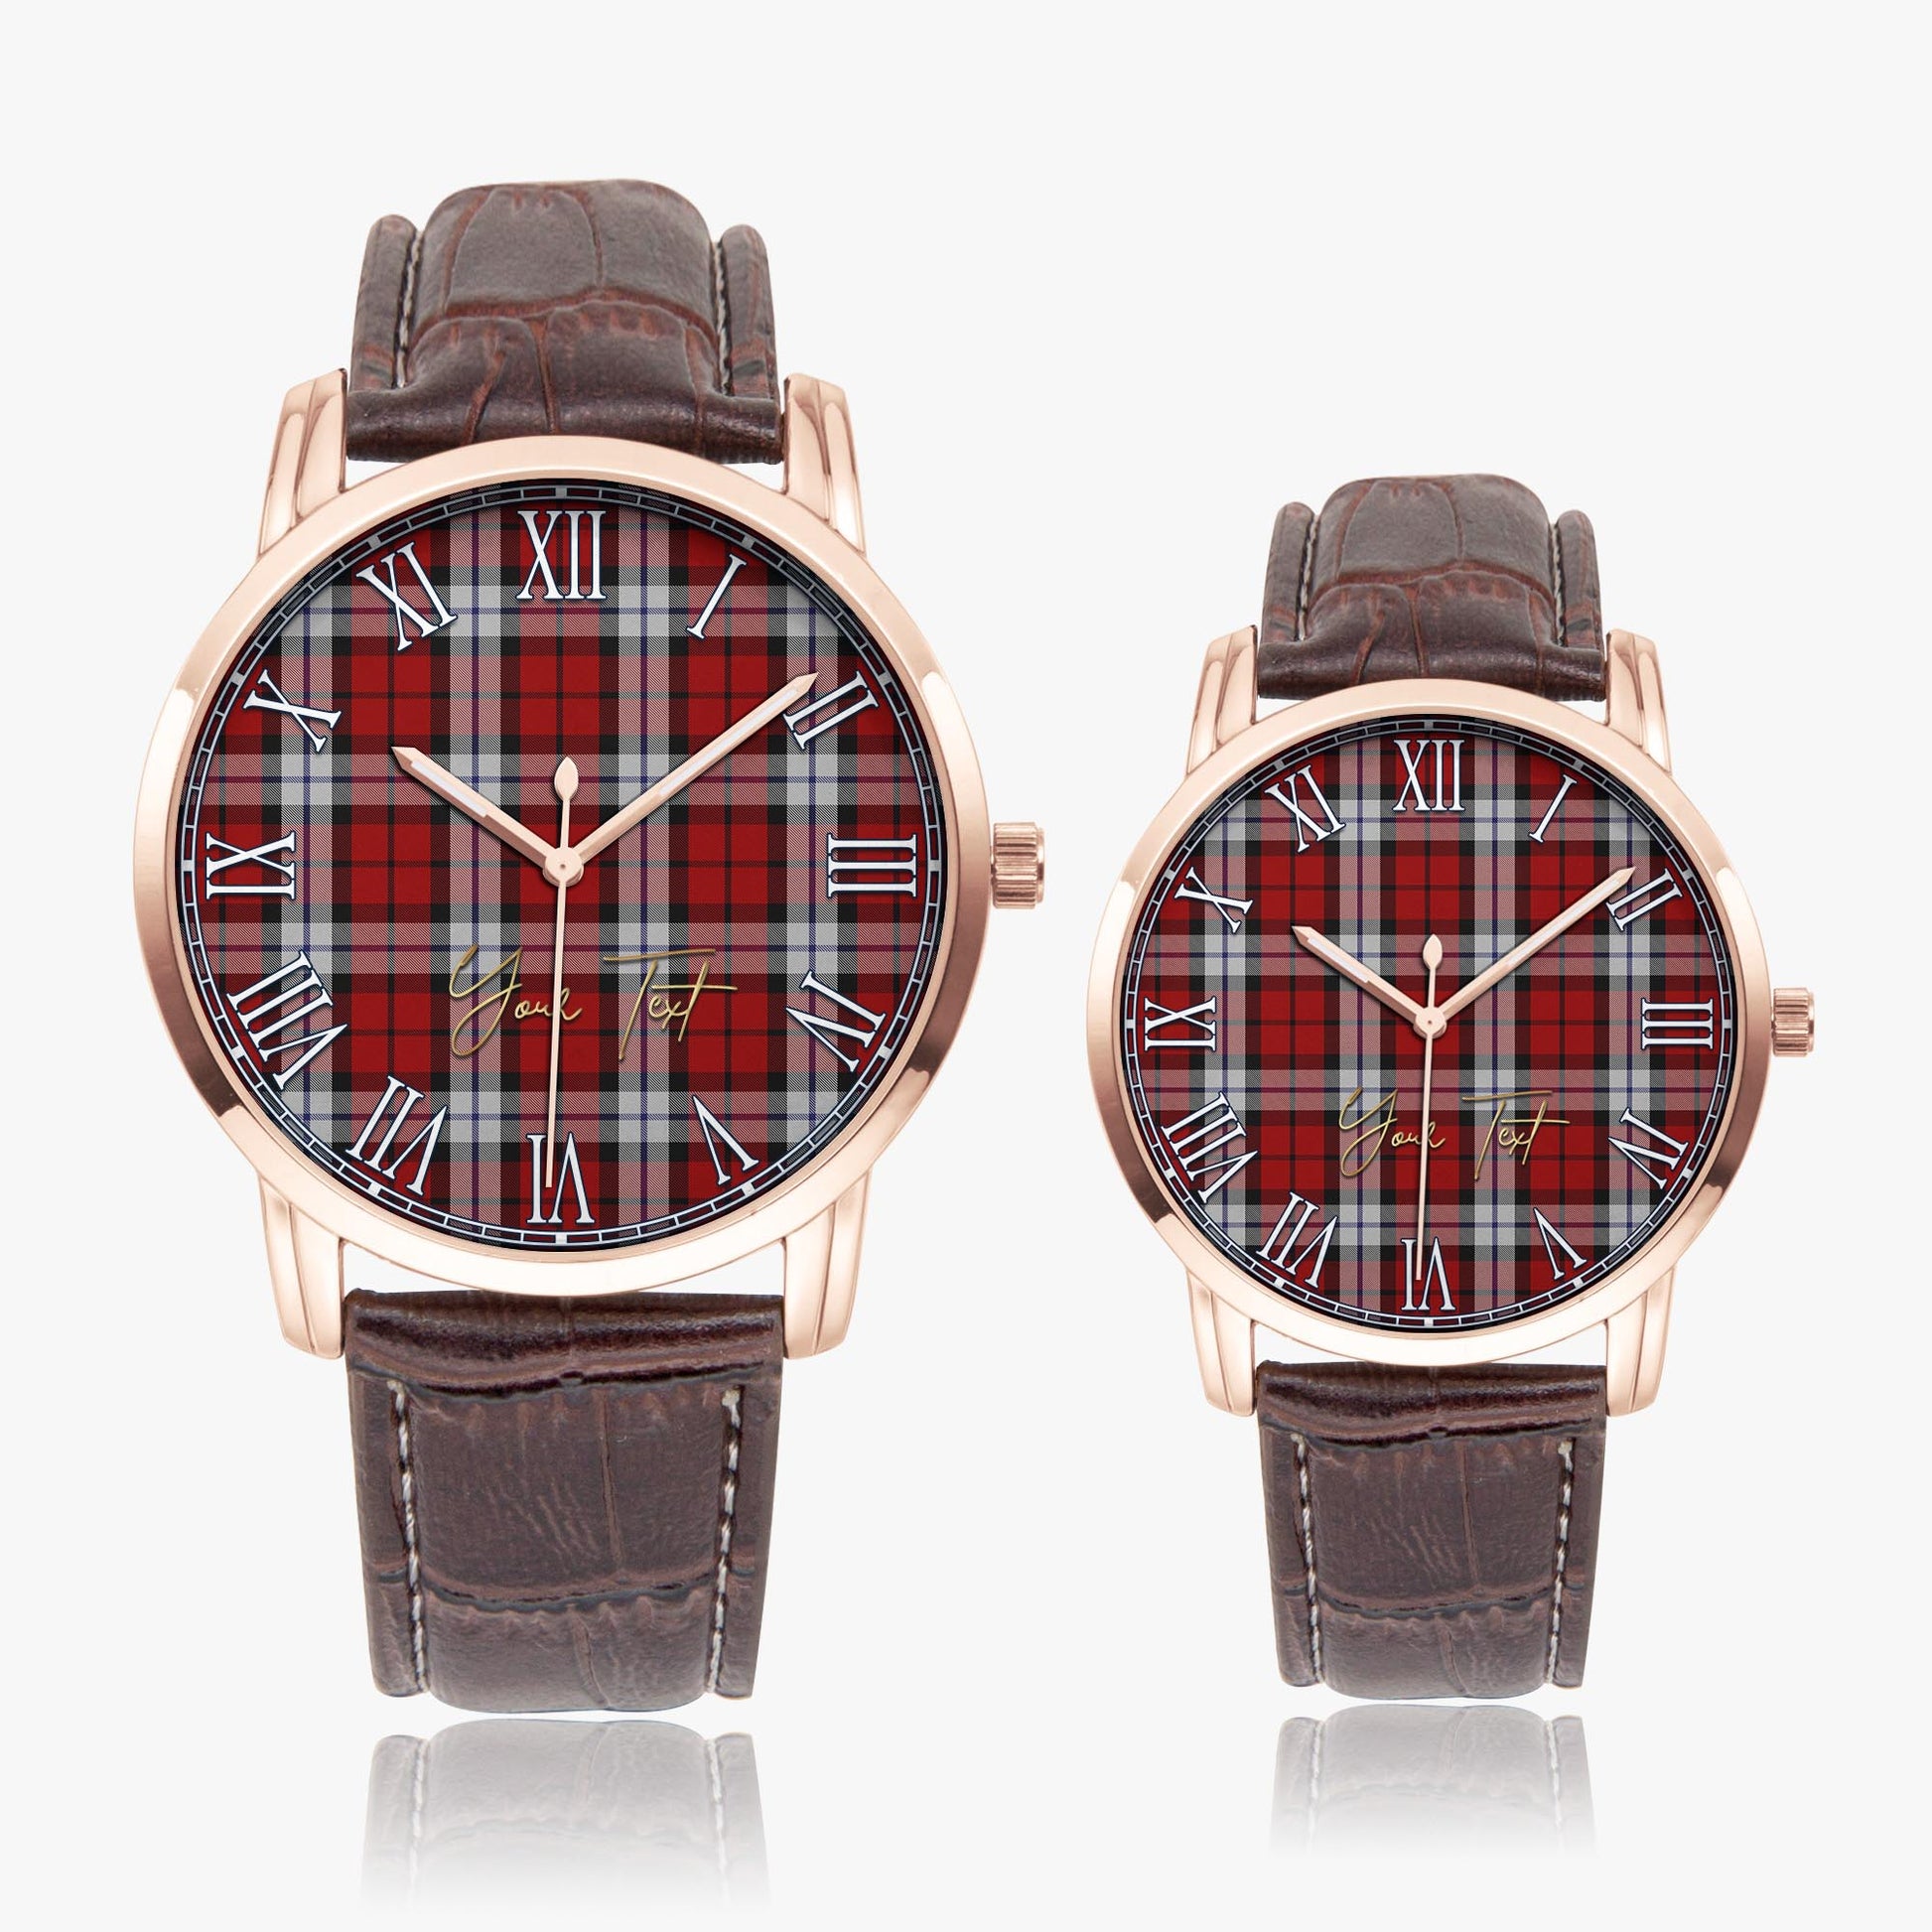 Brodie Dress Tartan Personalized Your Text Leather Trap Quartz Watch Wide Type Rose Gold Case With Brown Leather Strap - Tartanvibesclothing